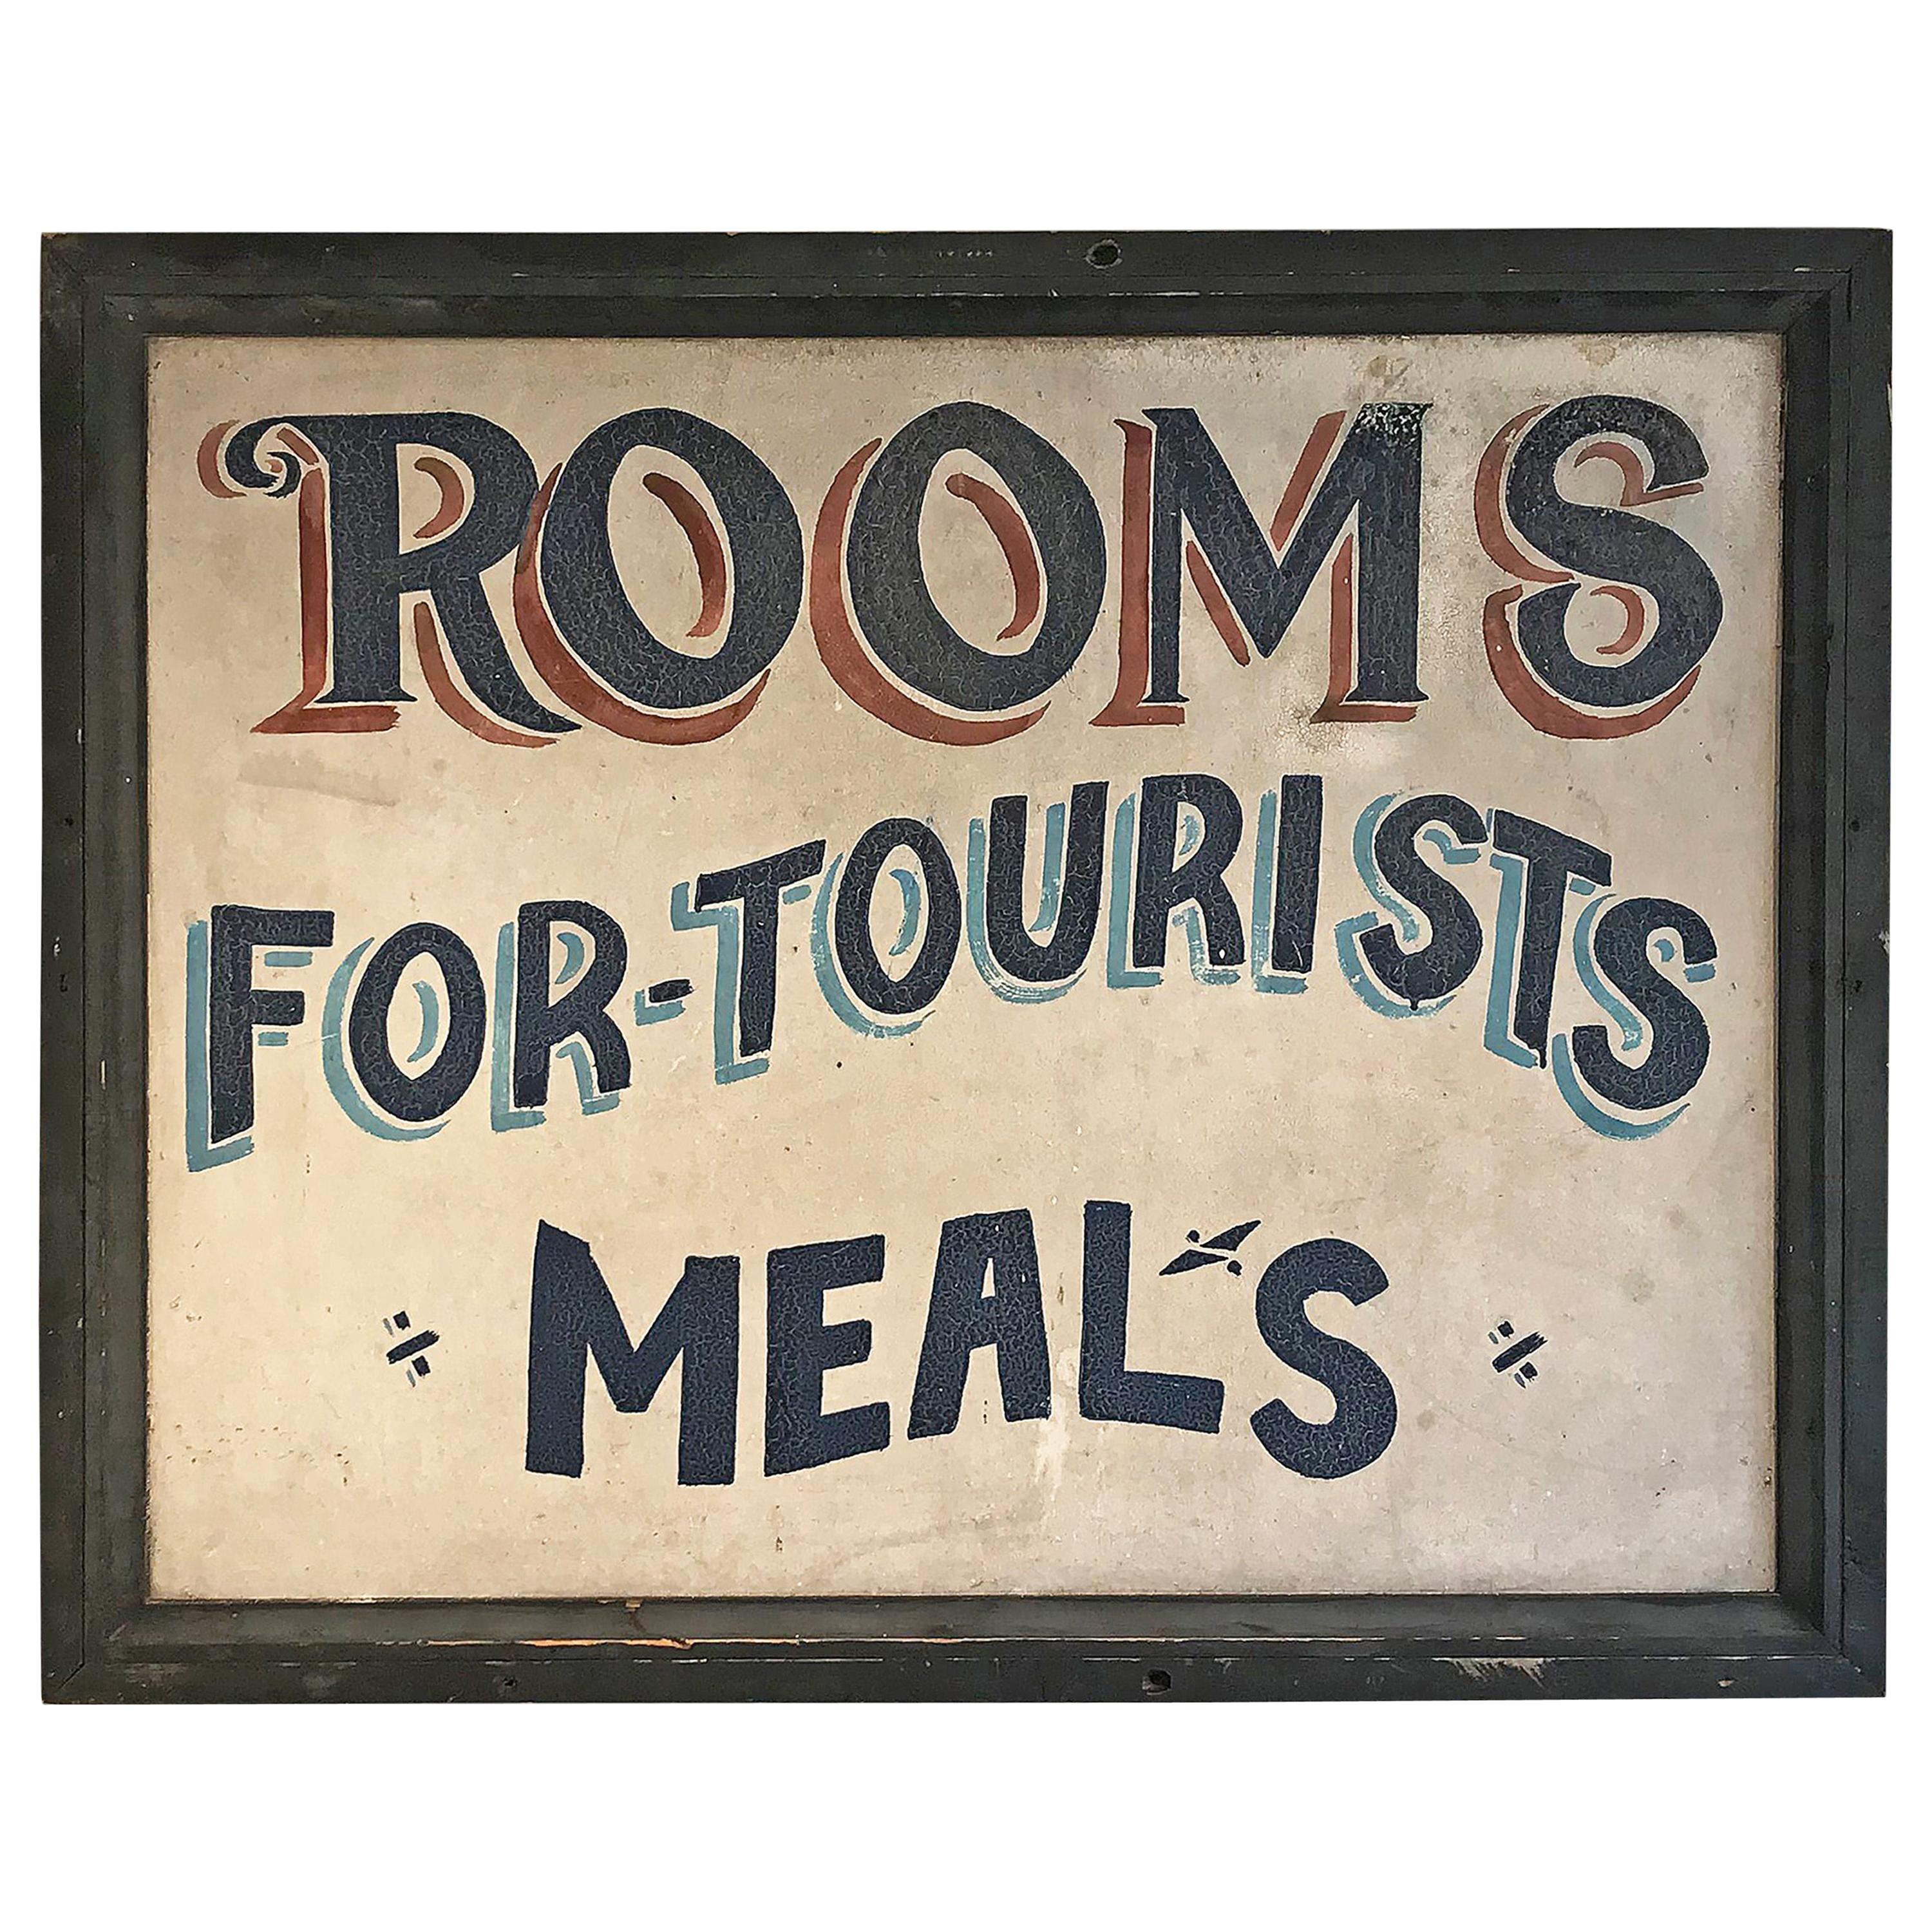 Trade Sign, Rooms or Tourists, Meals